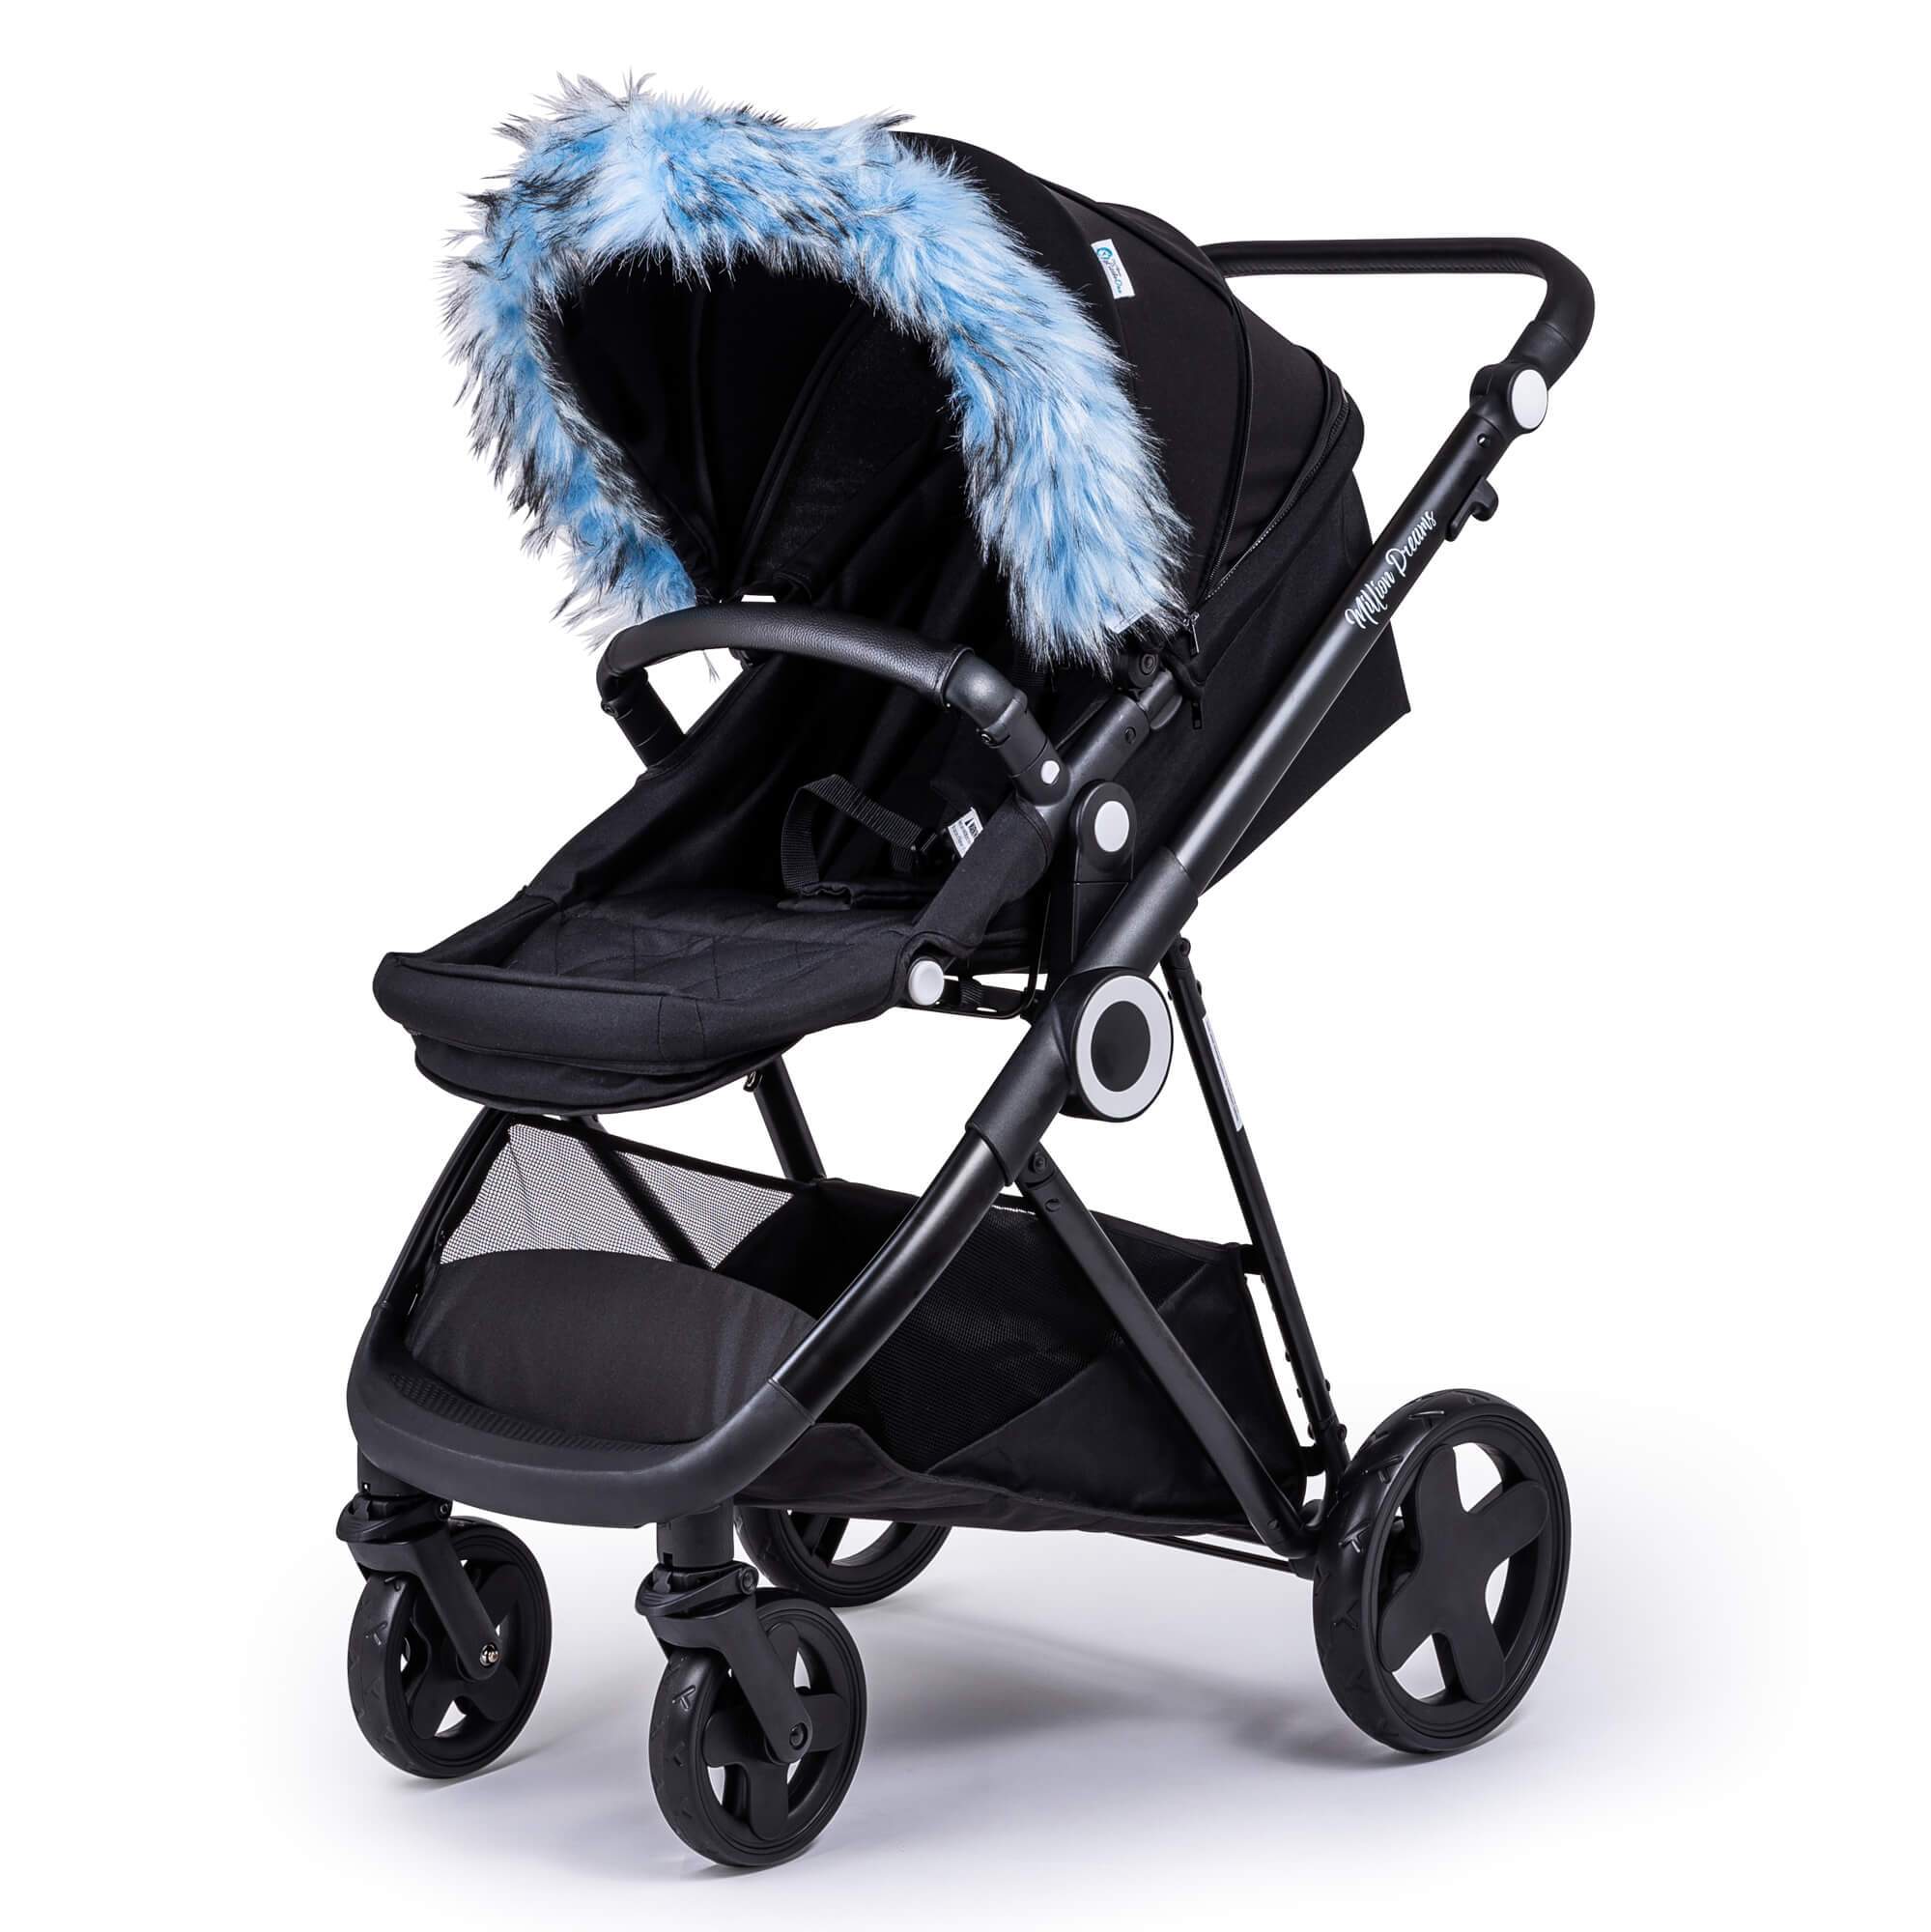 Pram Fur Hood Trim Attachment for Pushchair Compatible with Nania - Light Blue / Fits All Models | For Your Little One